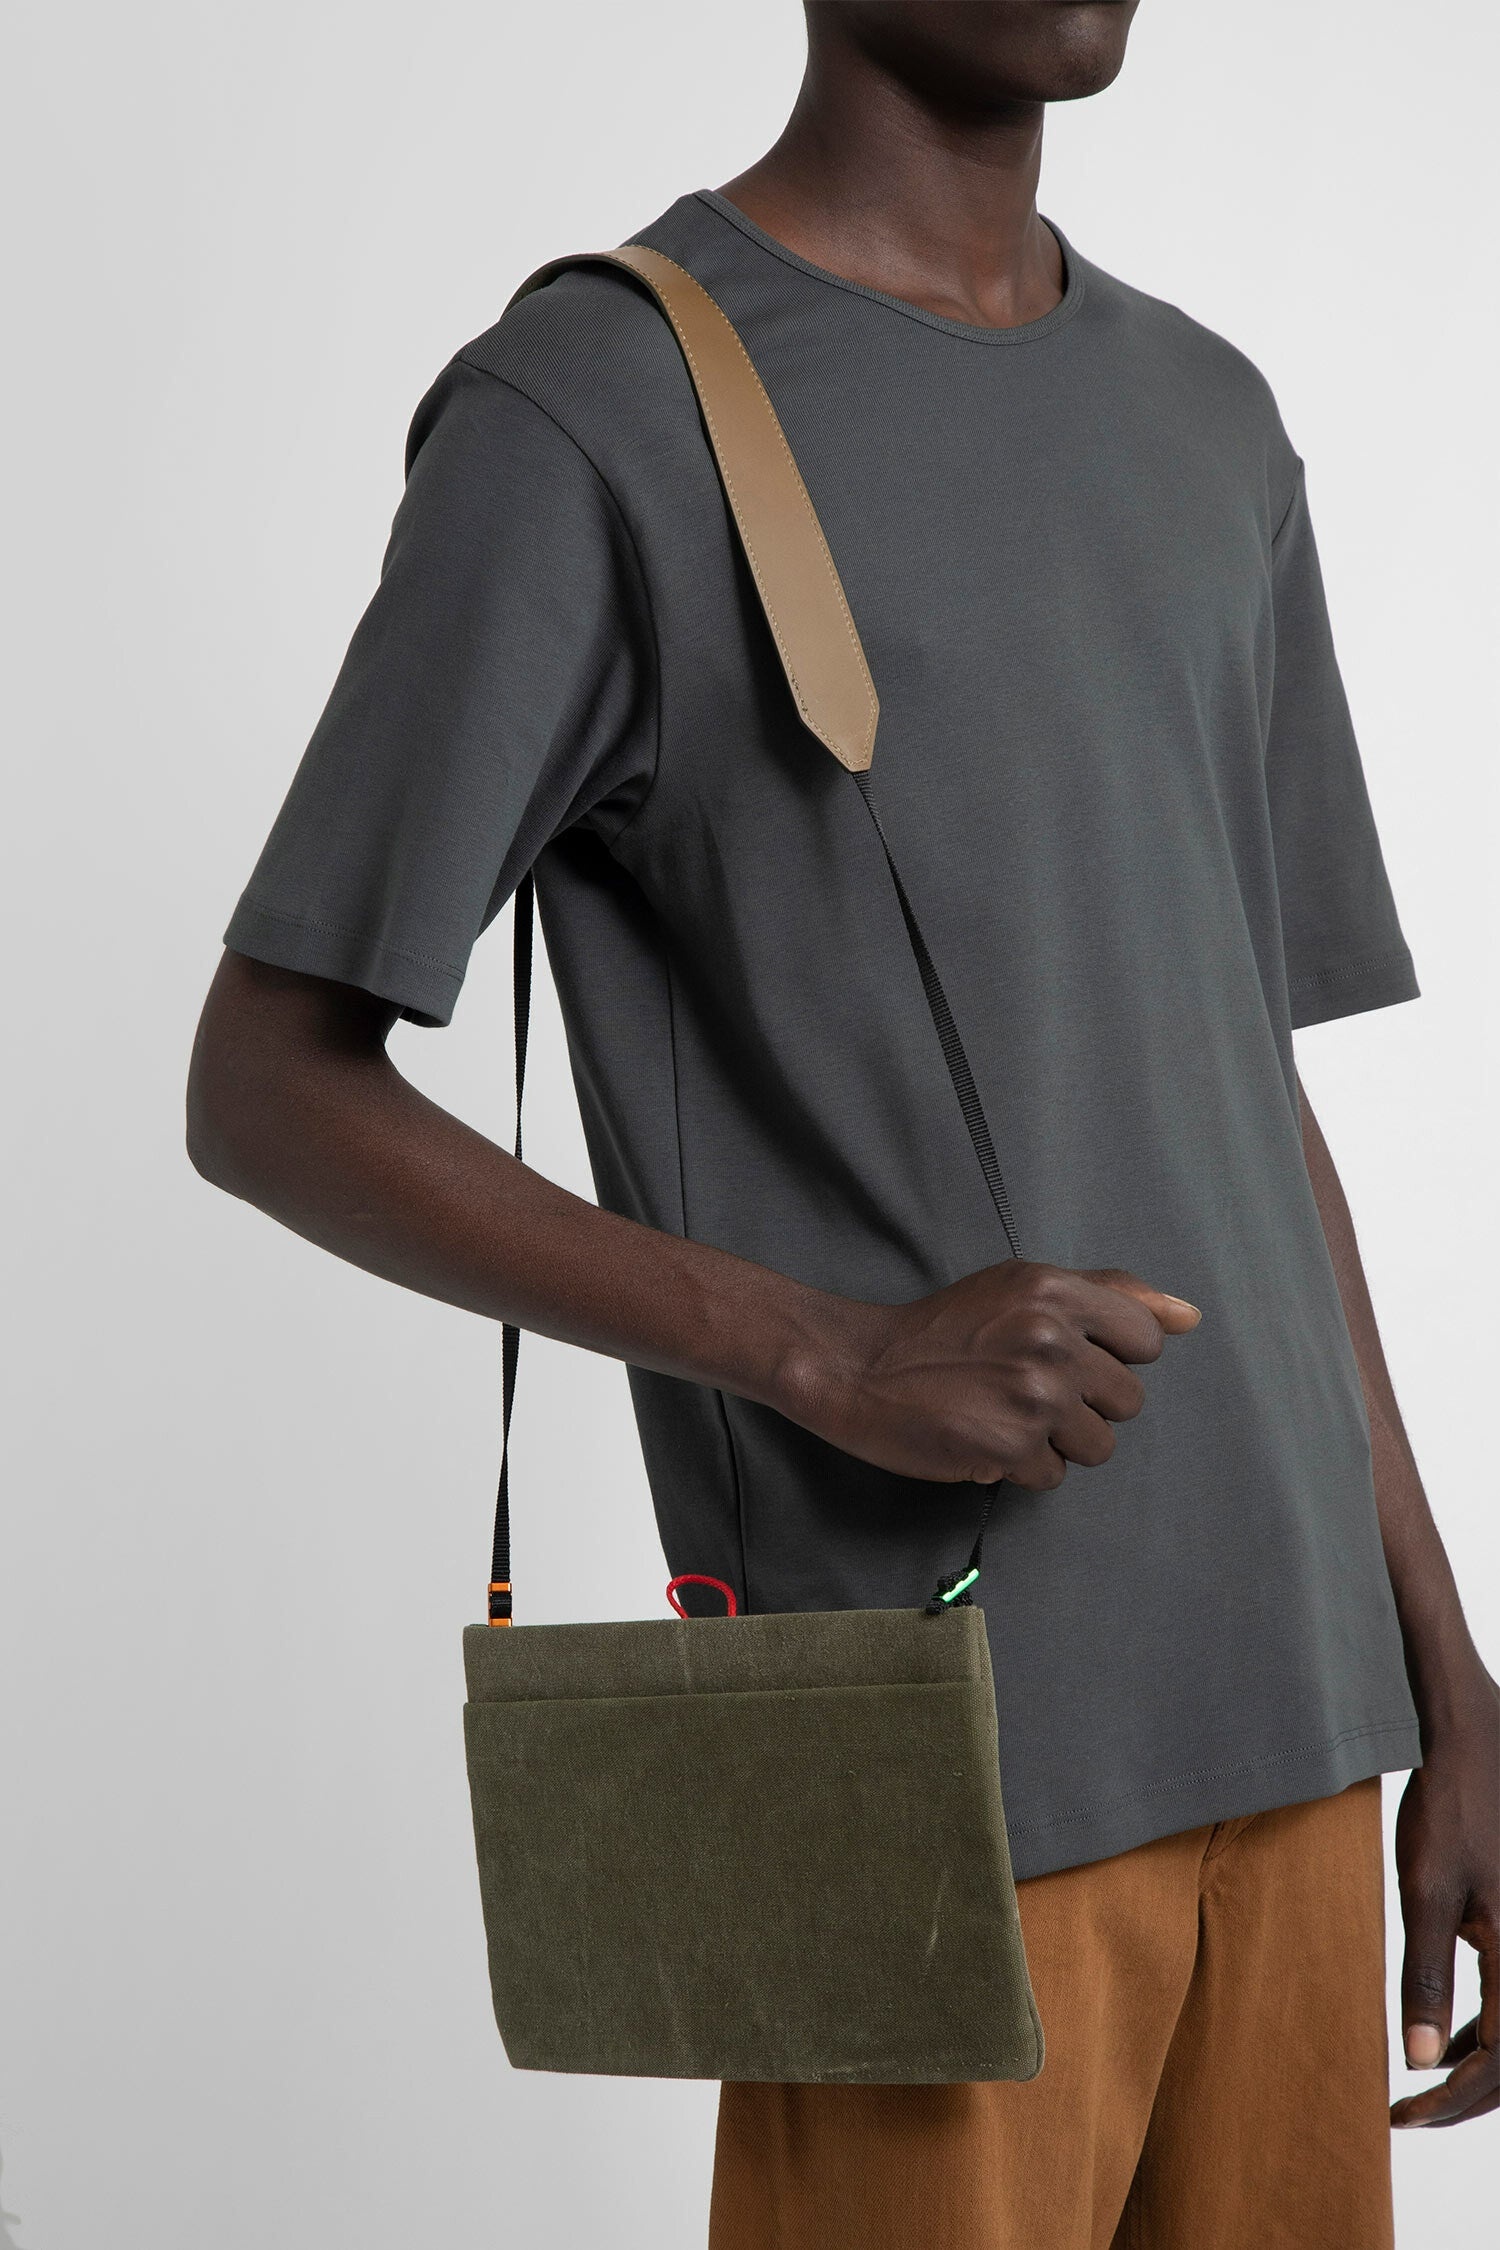 READYMADE UNISEX GREEN SHOULDER BAGS - 4